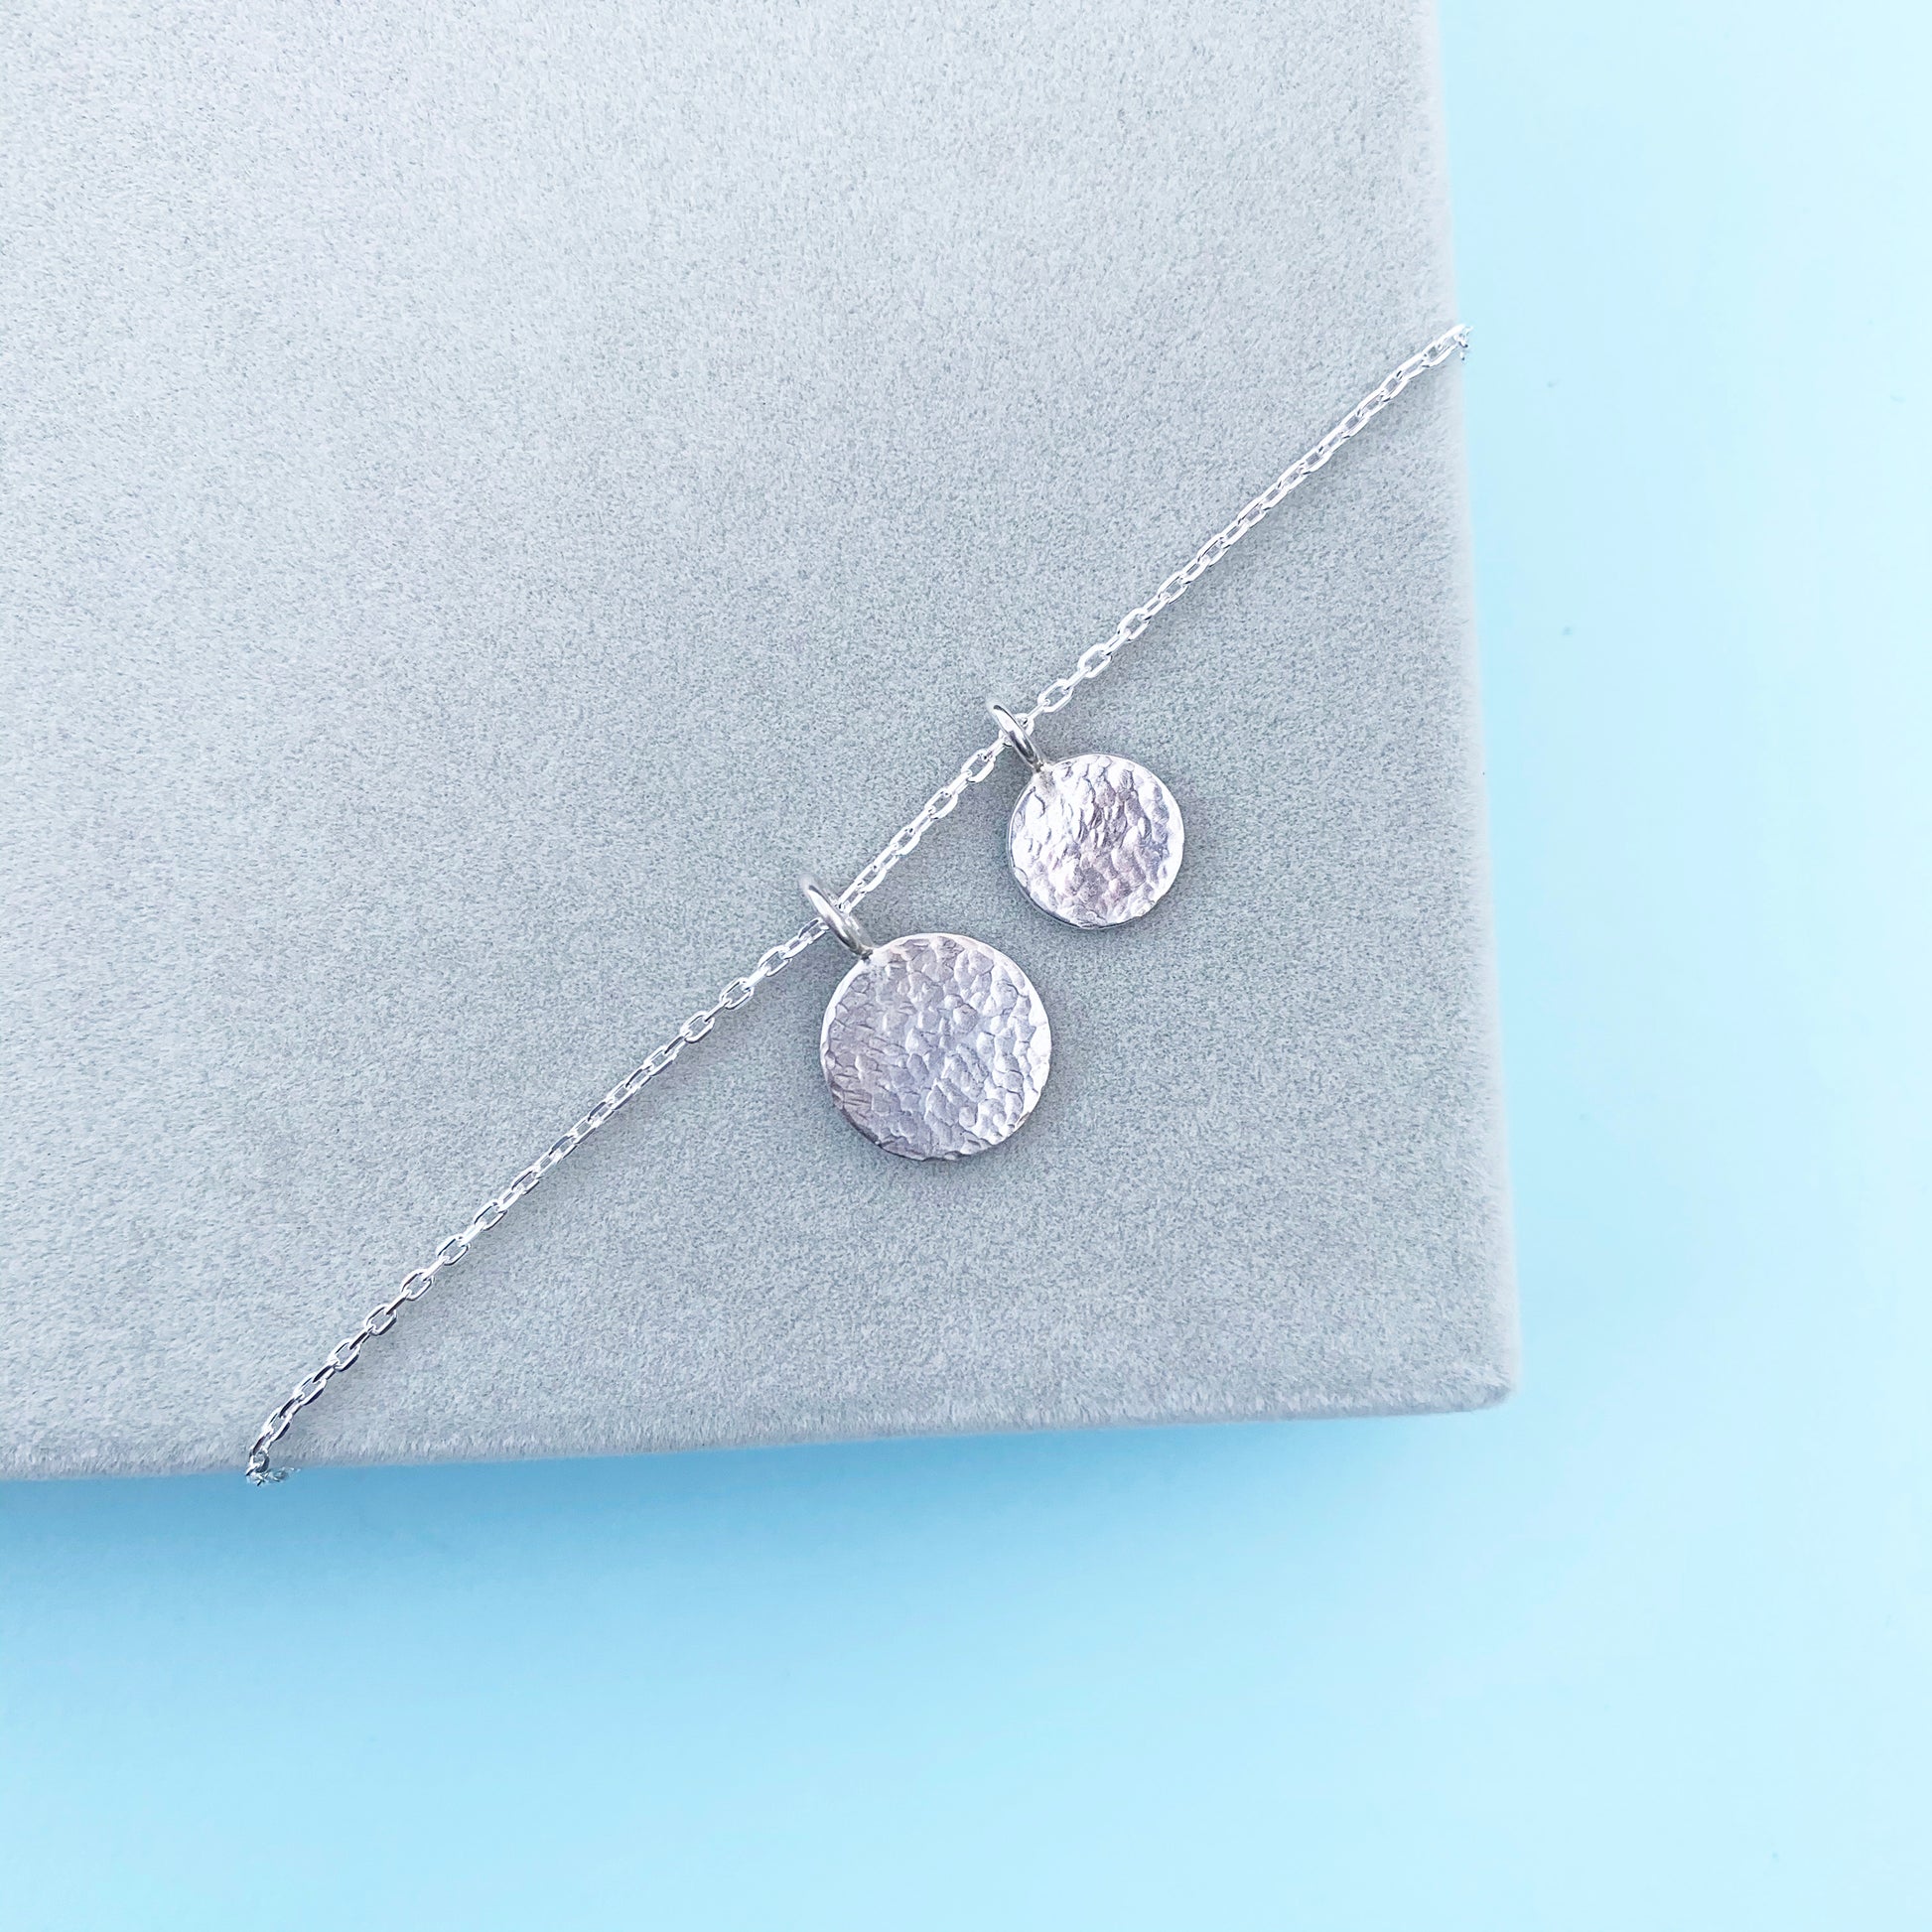  small silver ripple pendant necklace, polished ripple pendant, silver pendant, silver necklace, sterling silver necklace, silver ripple pendant necklace, small ripple pendant